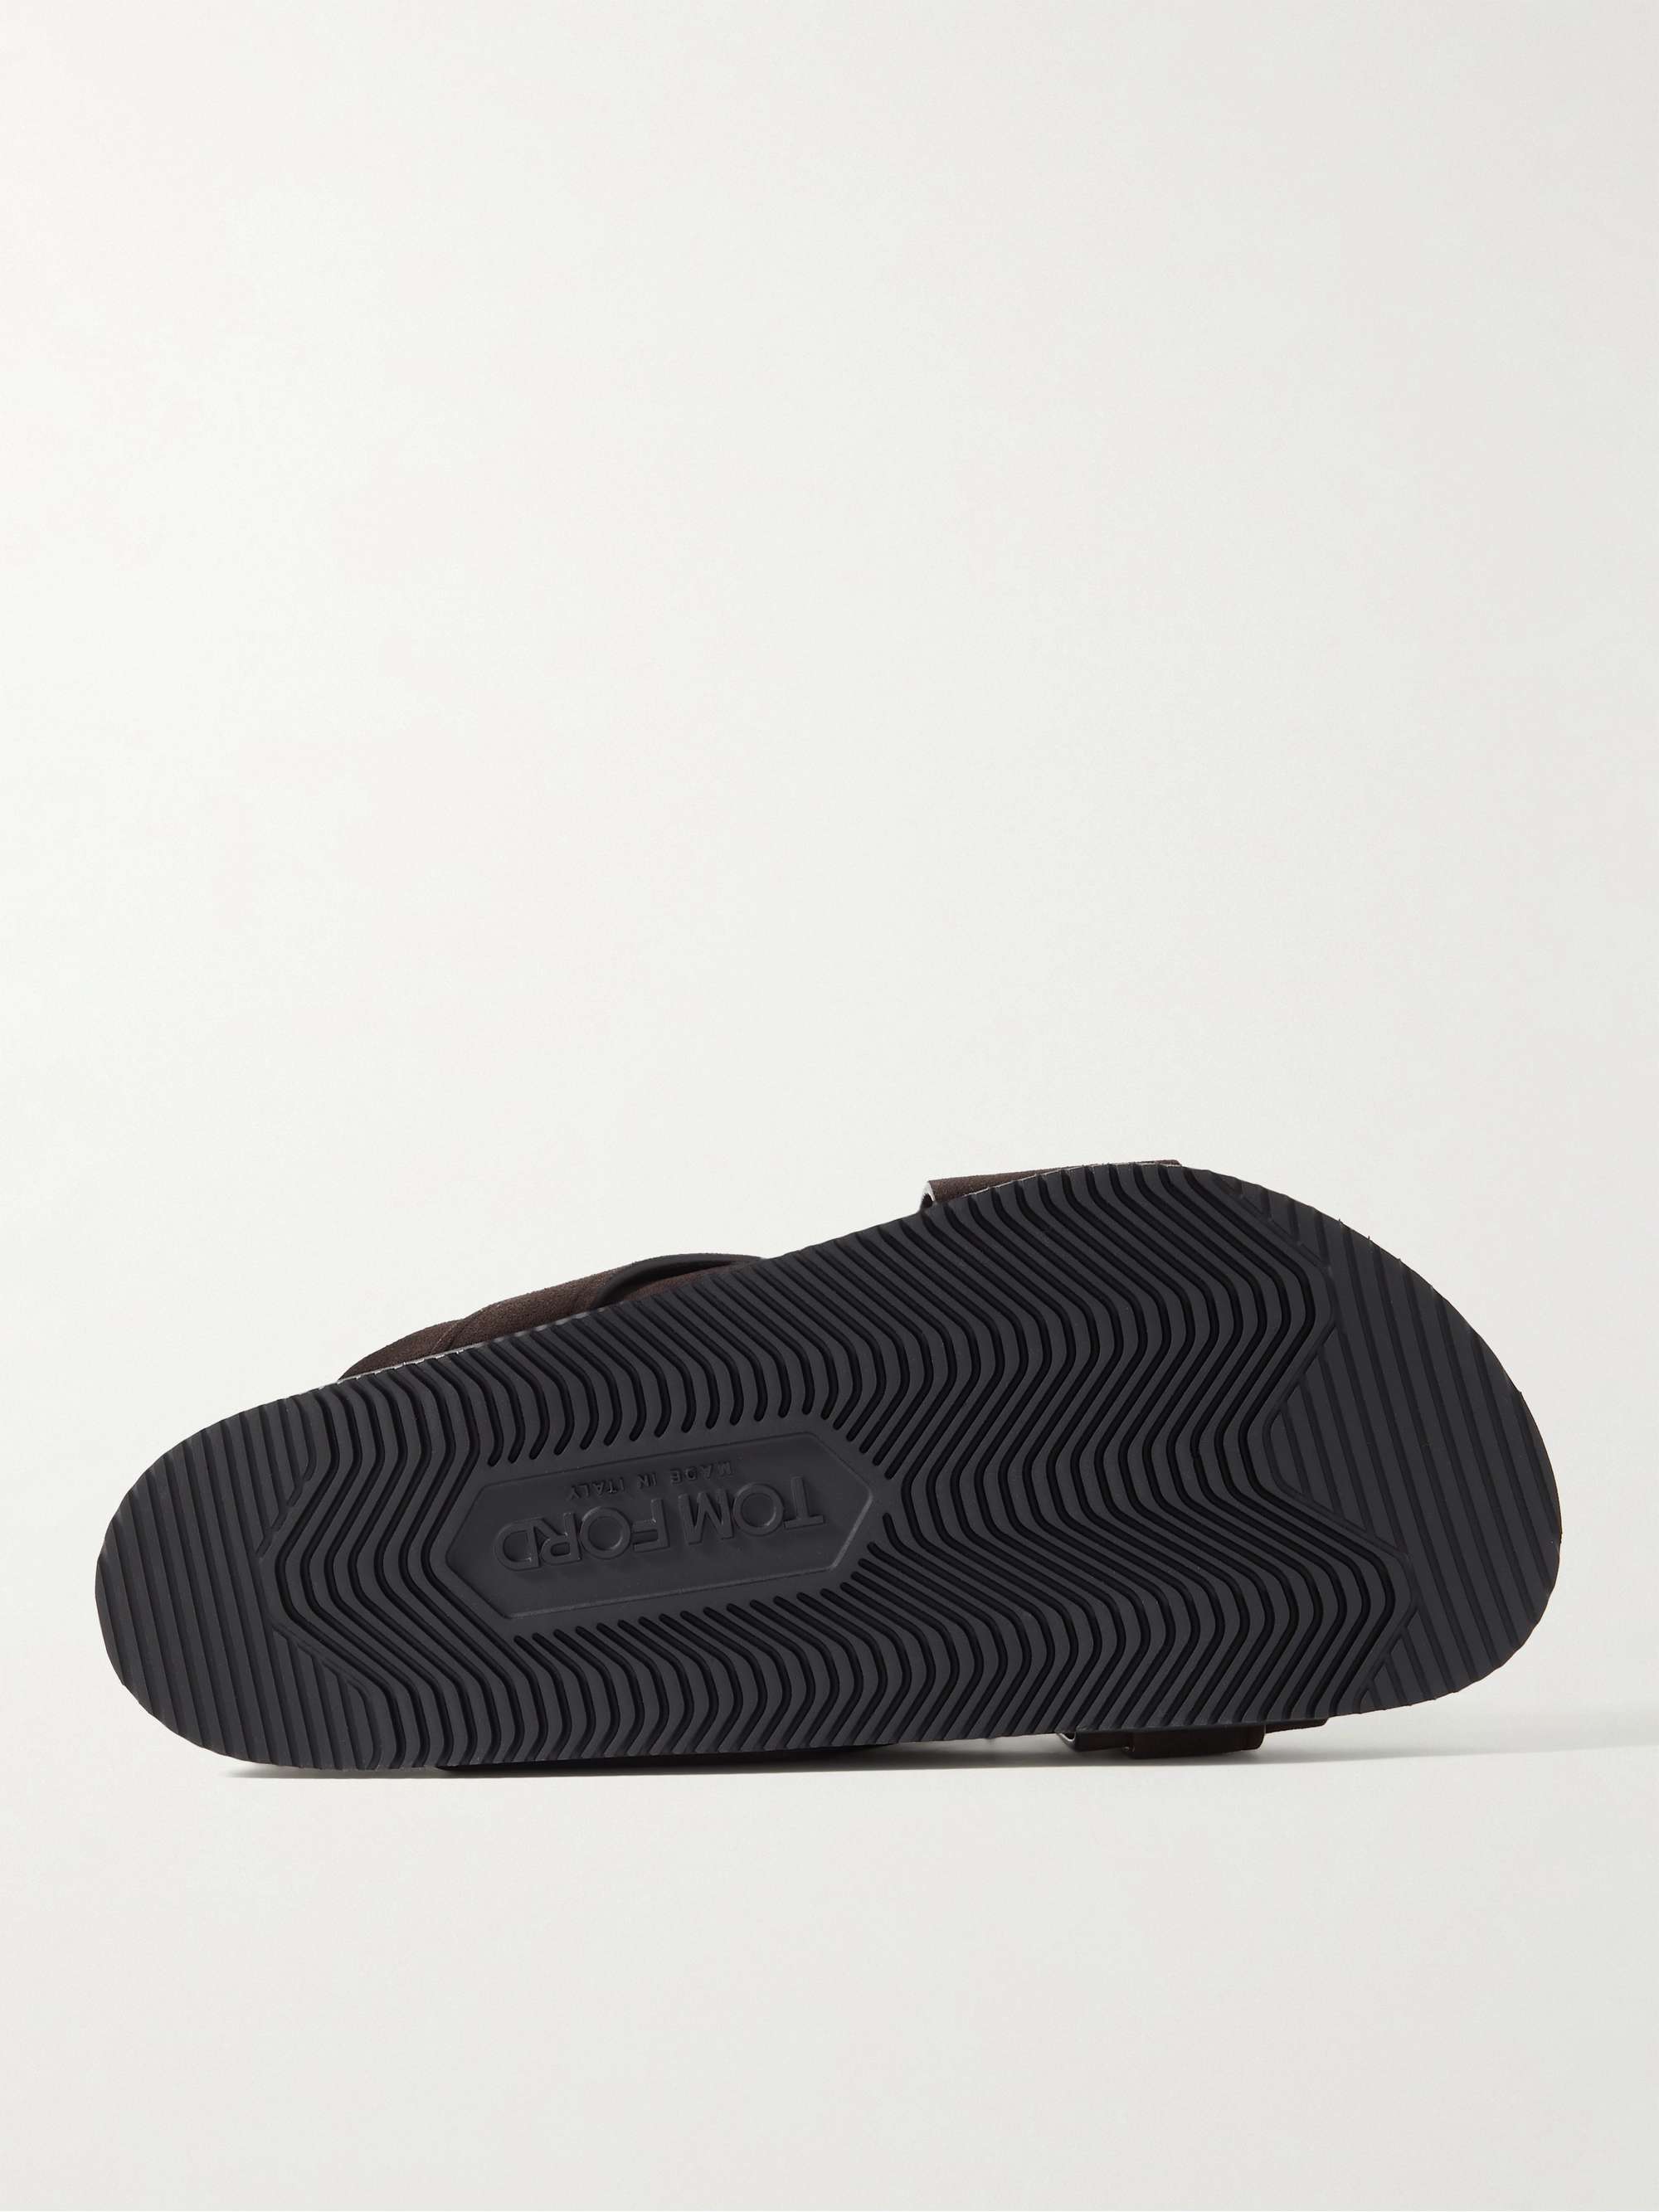 TOM FORD Wicklow Perforated Suede Slides